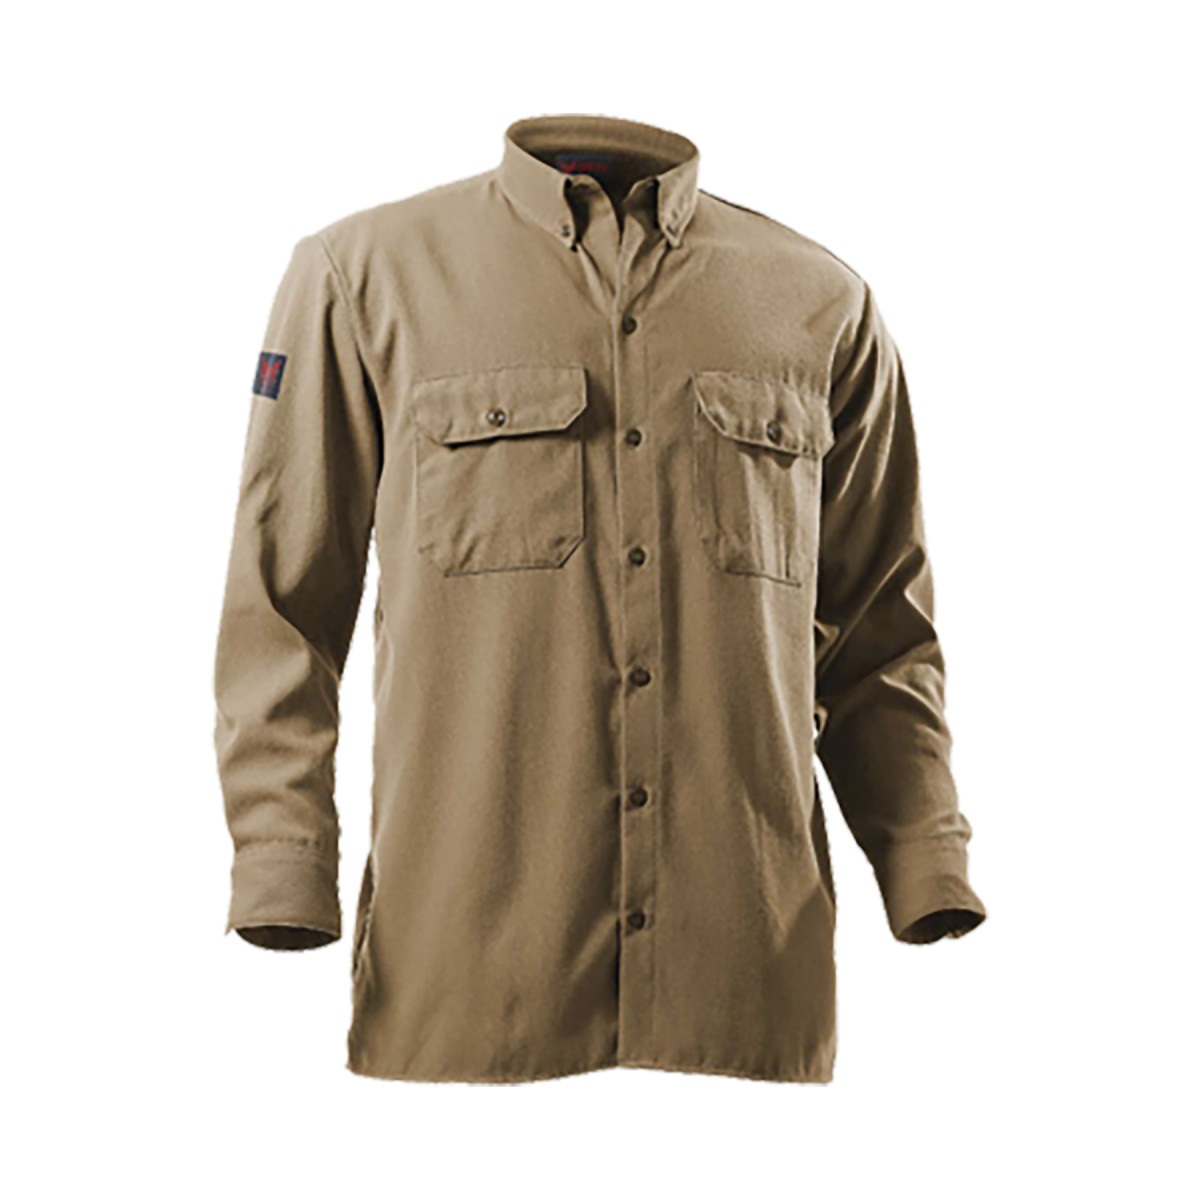 12 cal Arc Rated FR Button Front Work Shirt in Khaki